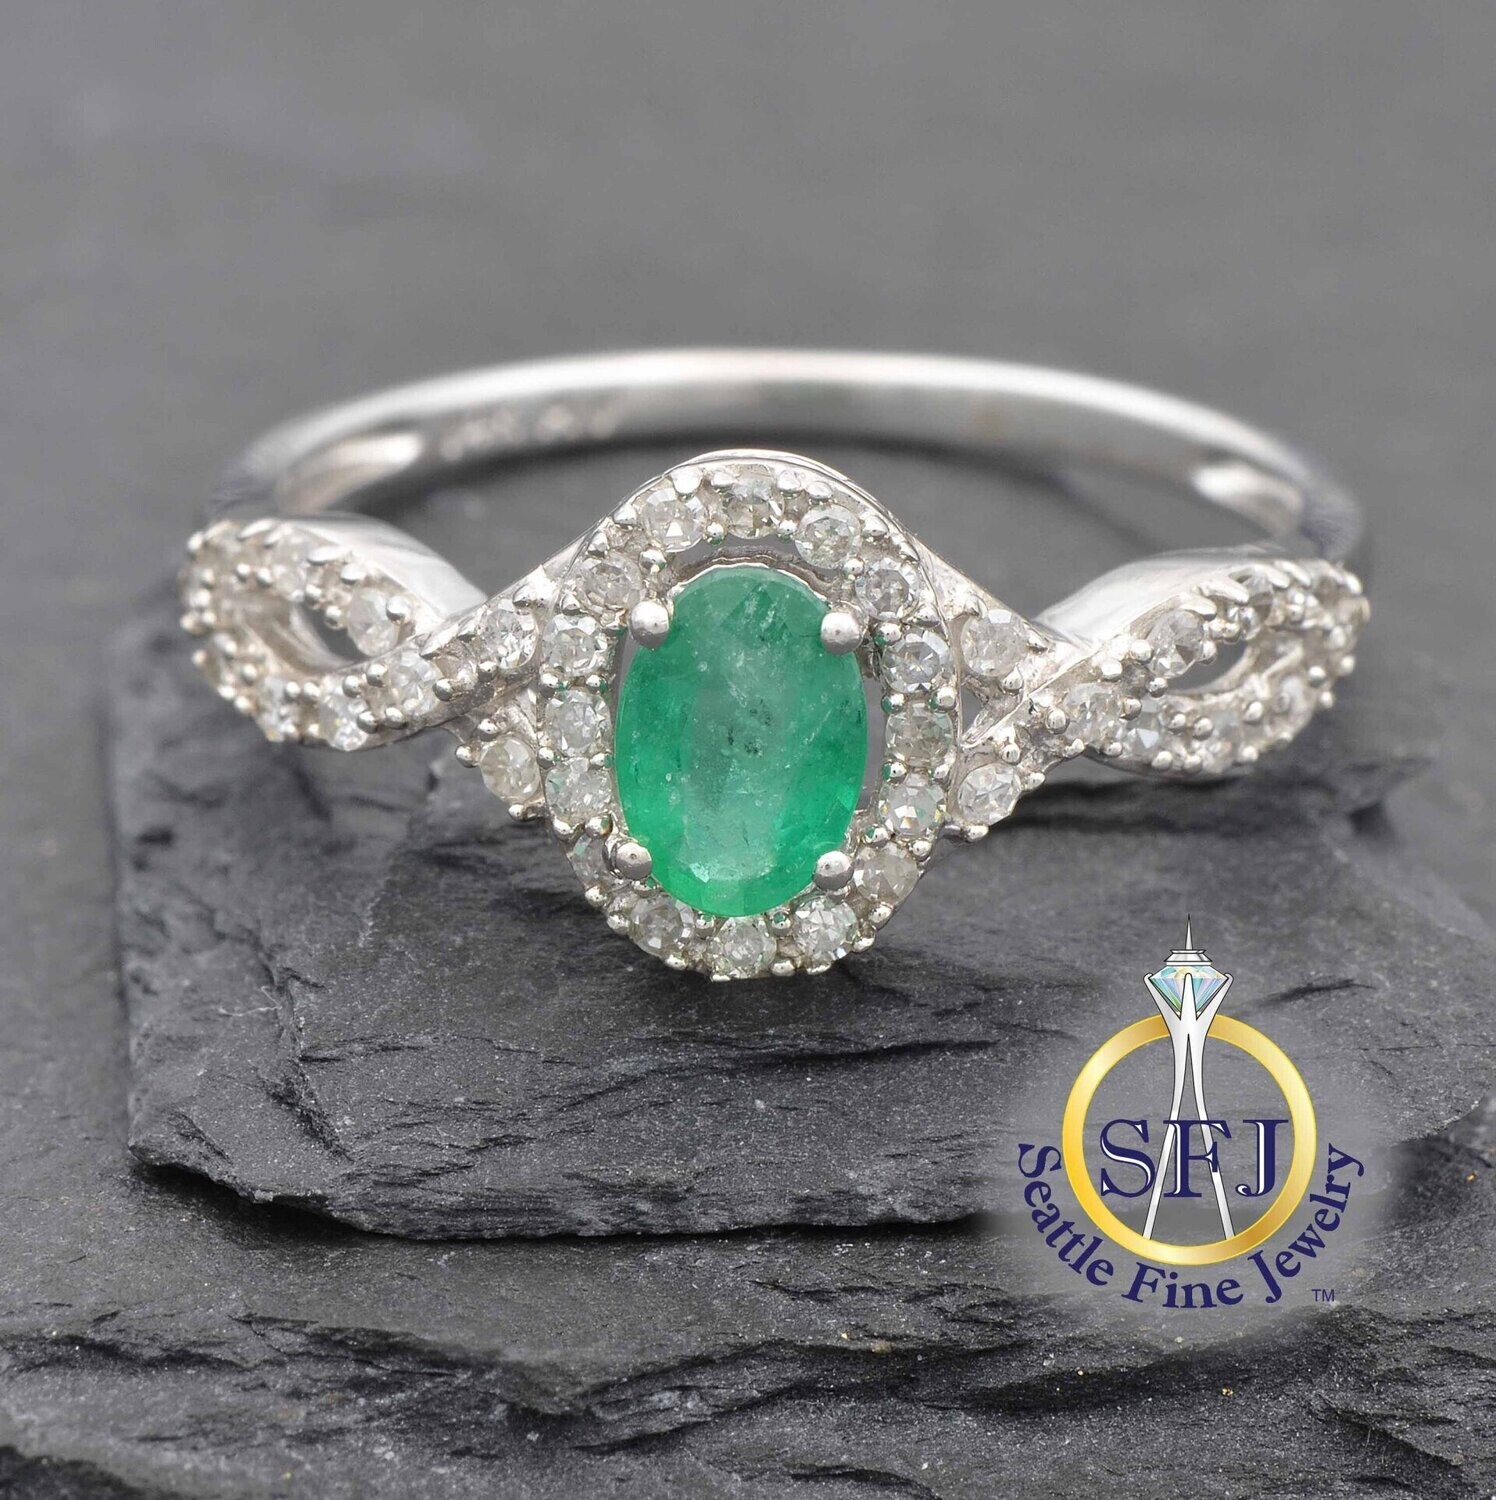 Emerald and Diamond Halo Ring, Solid 14K White Gold